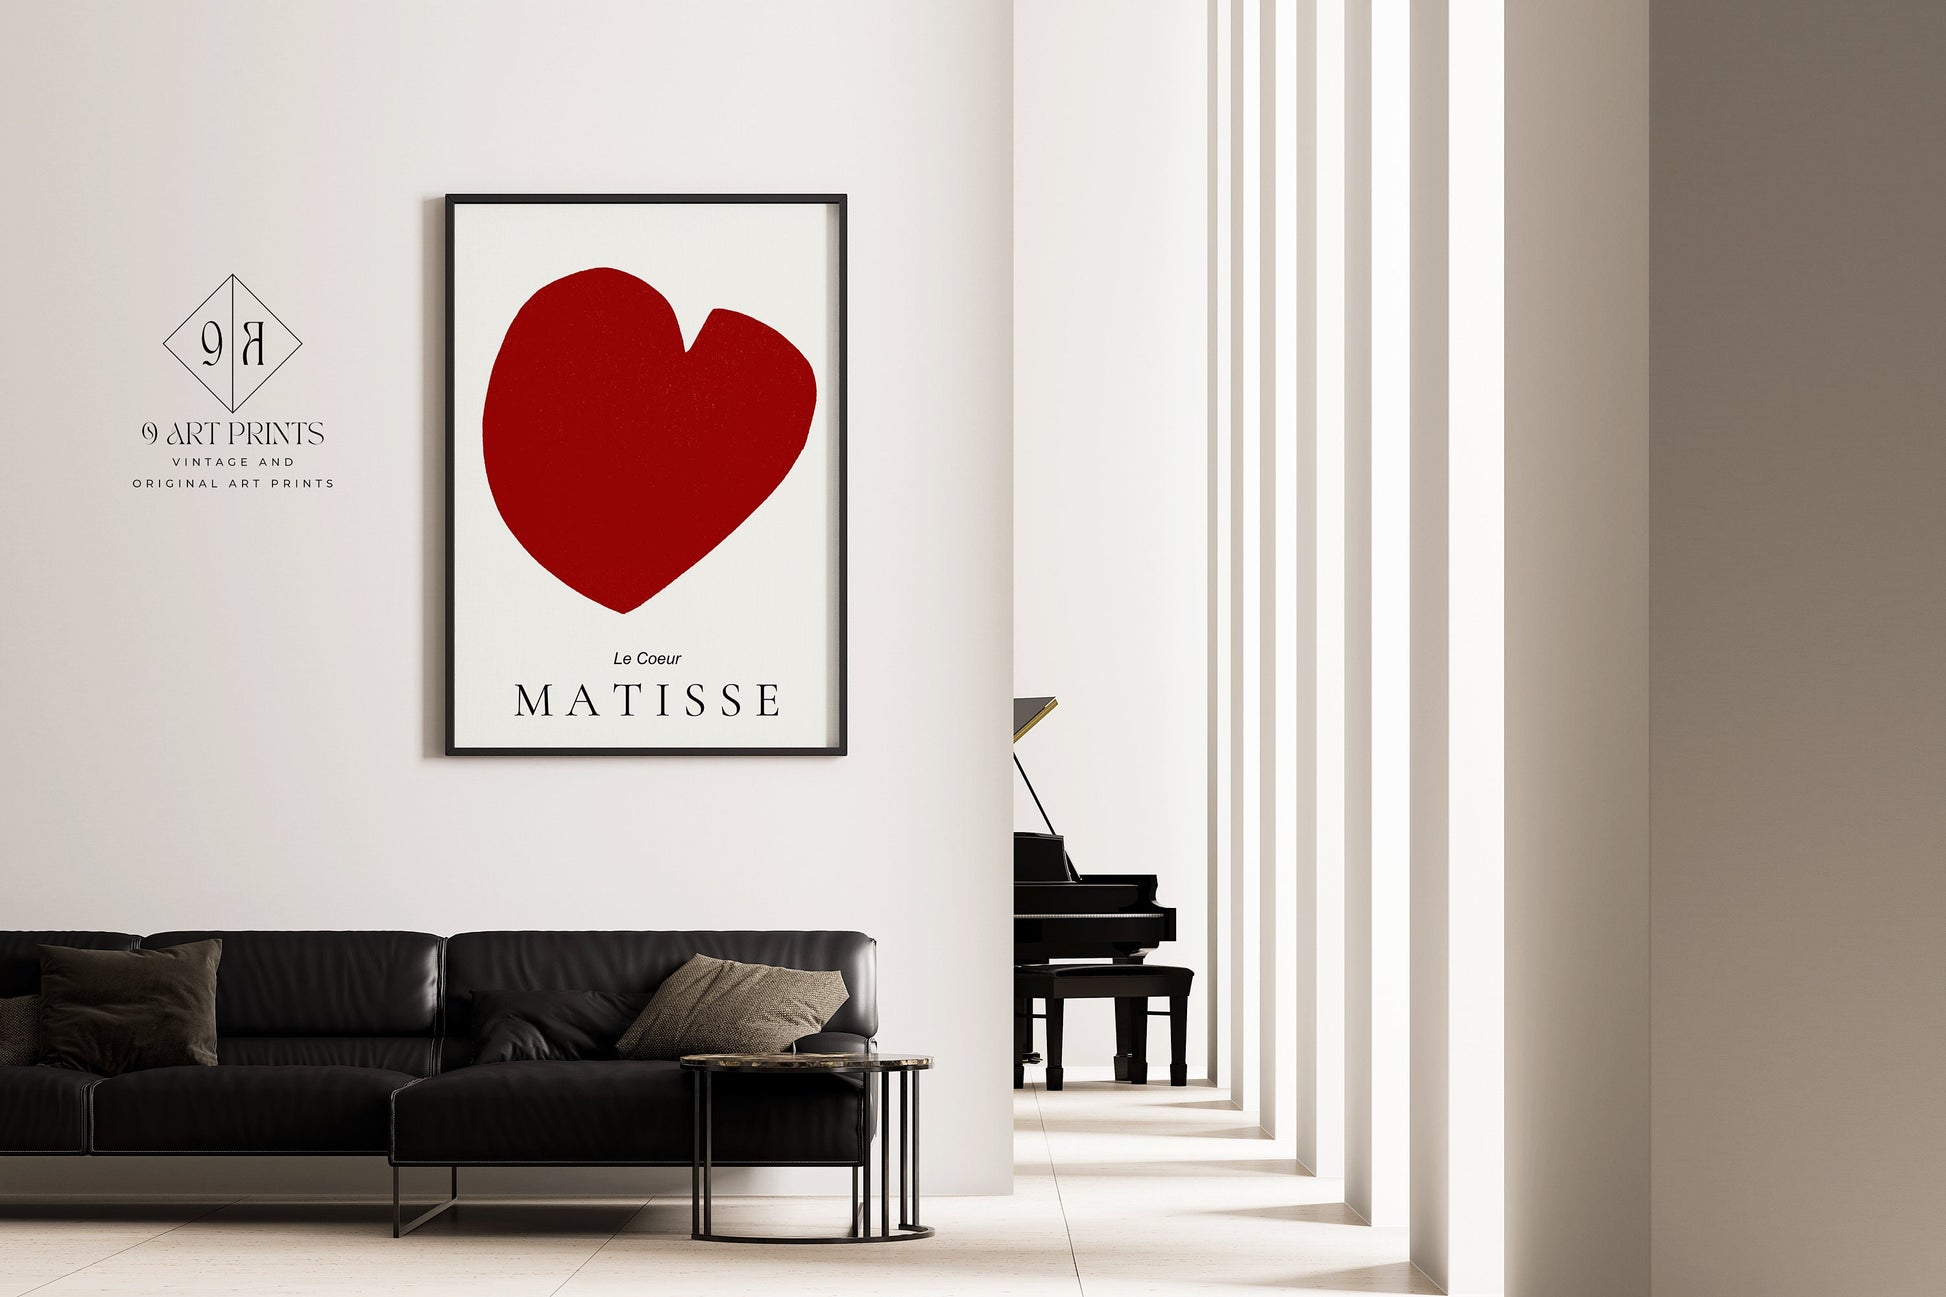 Framed Henri Matisse The Heart POSTER Red Minimalist Famous Art Print Retro Museum Ready to Hang Home Office Decor Gift Berggruen and Cie